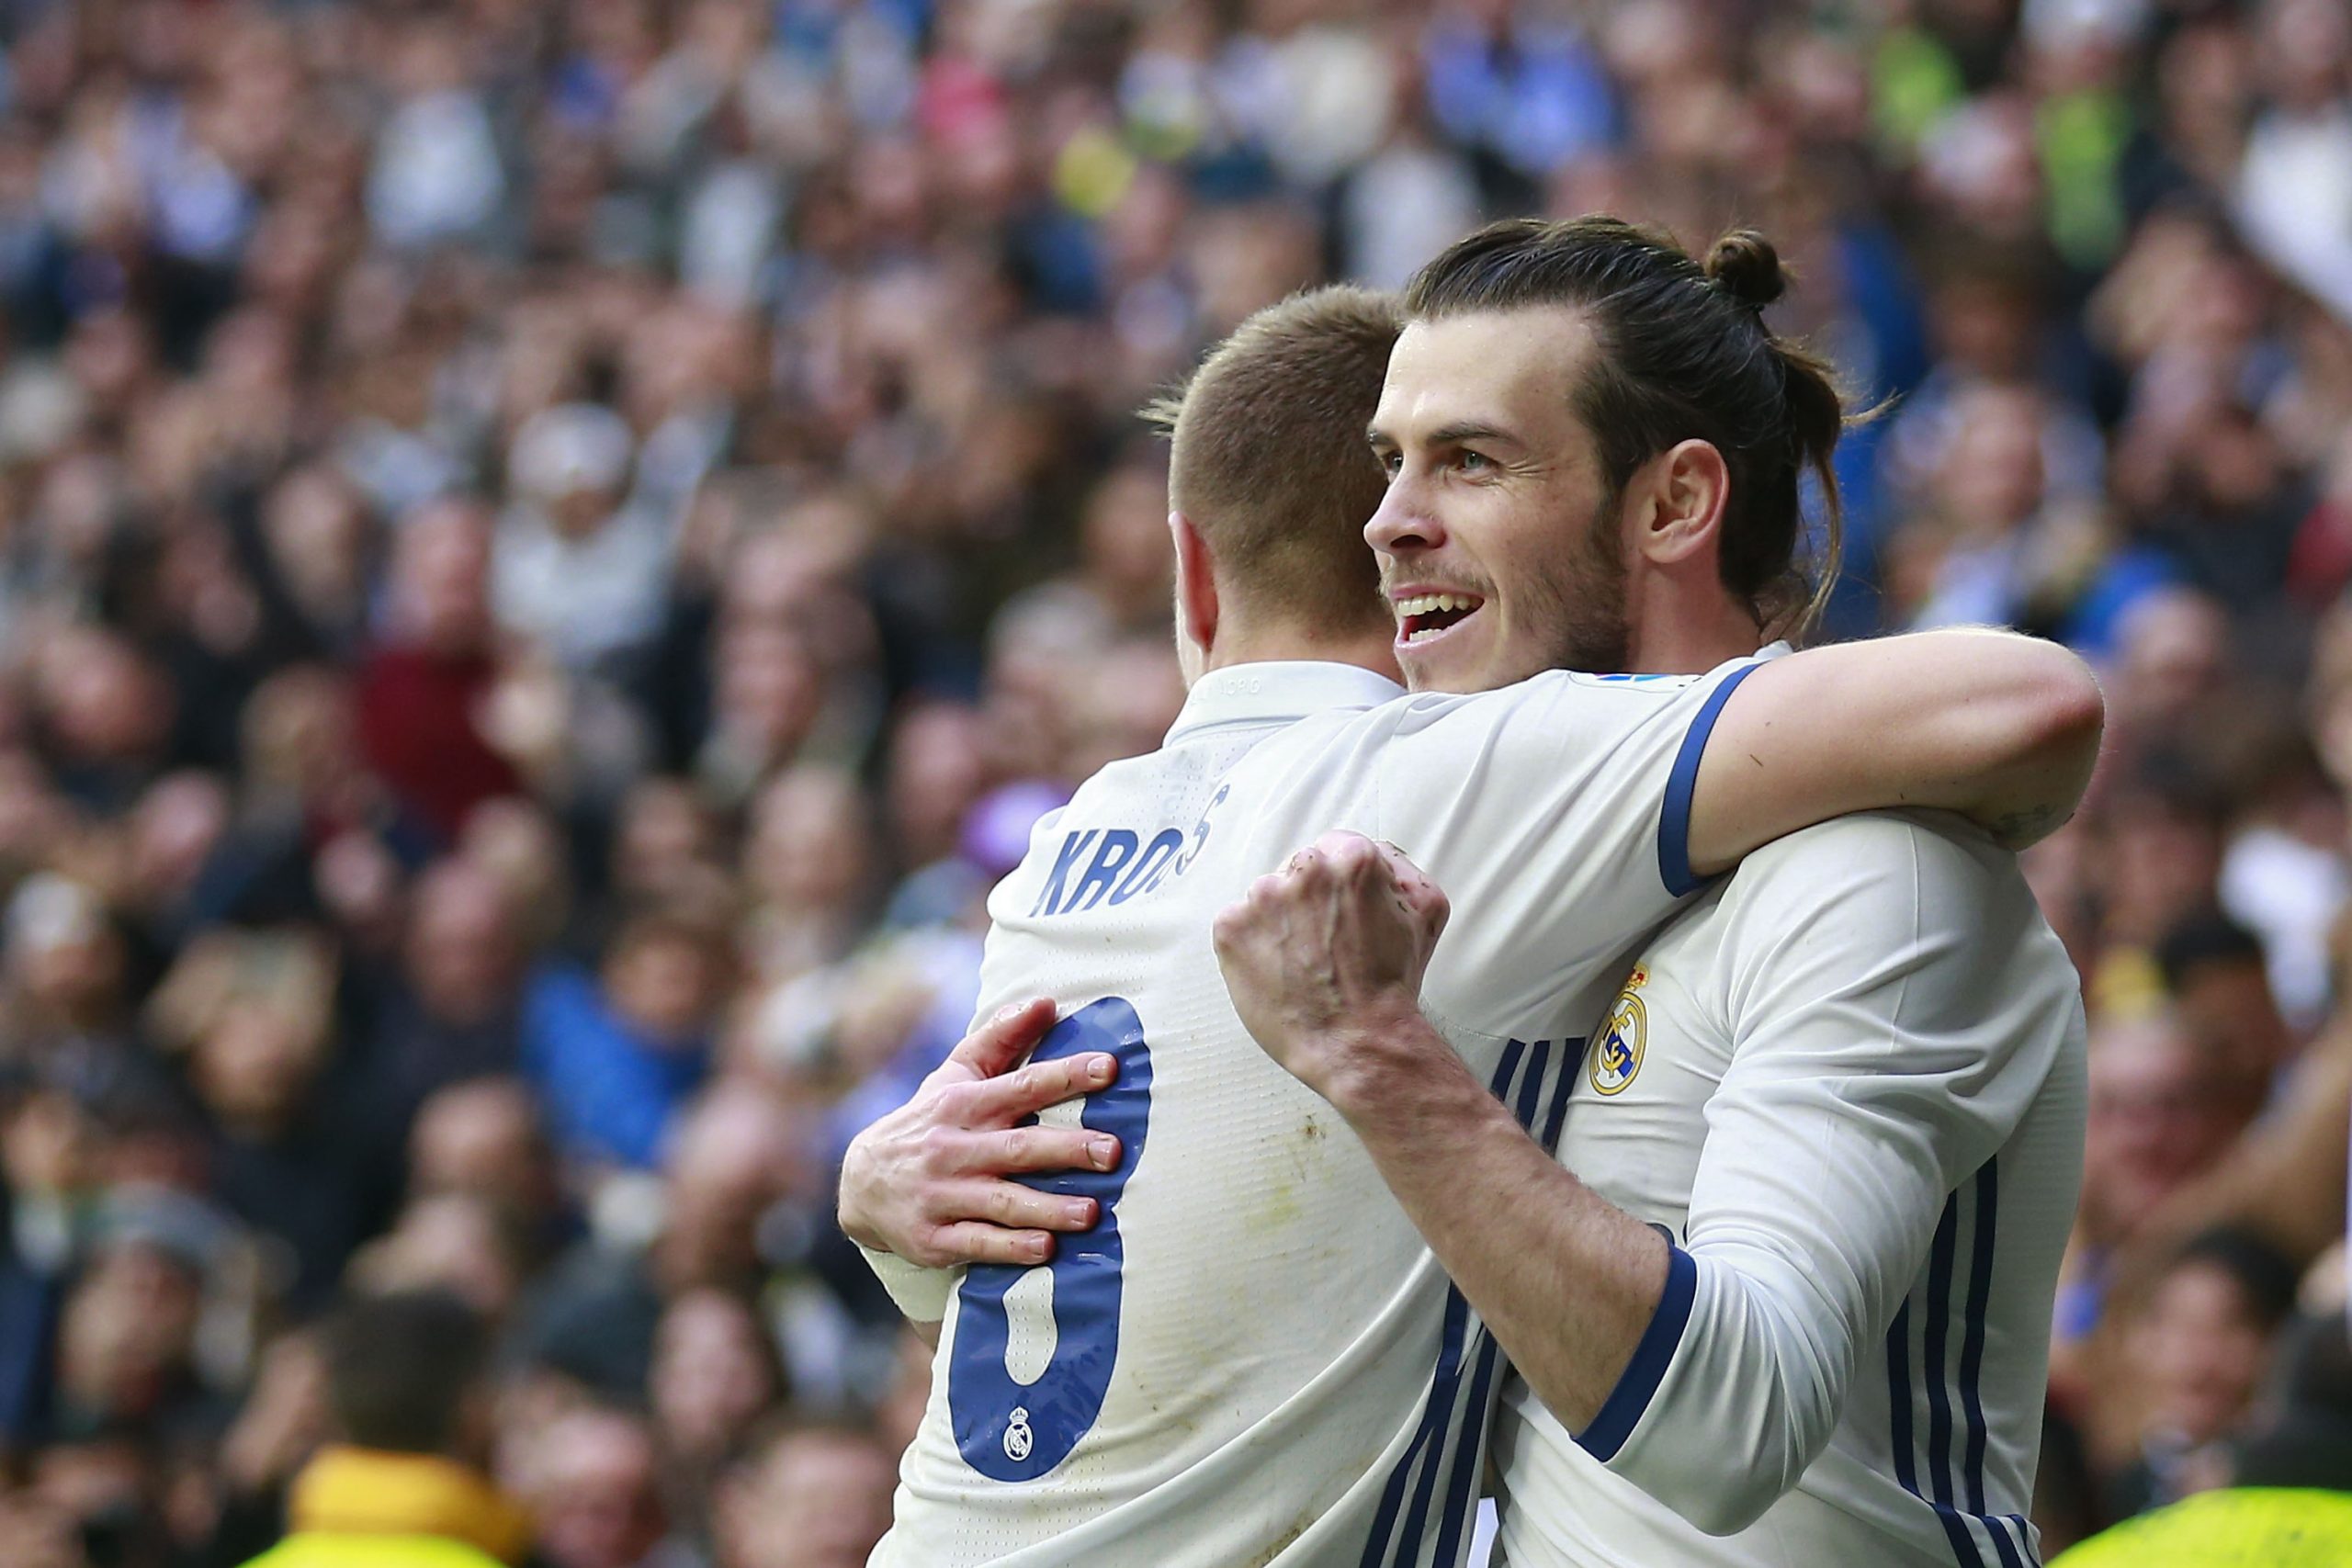 Gareth Bale (R) of Real Madrid CF celebrates scoring their second goal with teammate Toni Kroos (L) during the La Liga match between Real Madrid CF and RCD Espanyol at Estadio Santiago Bernabeu on February 18, 2017 in Madrid, Spain.  (Photo by Gonzalo Arroyo Moreno/Getty Images)